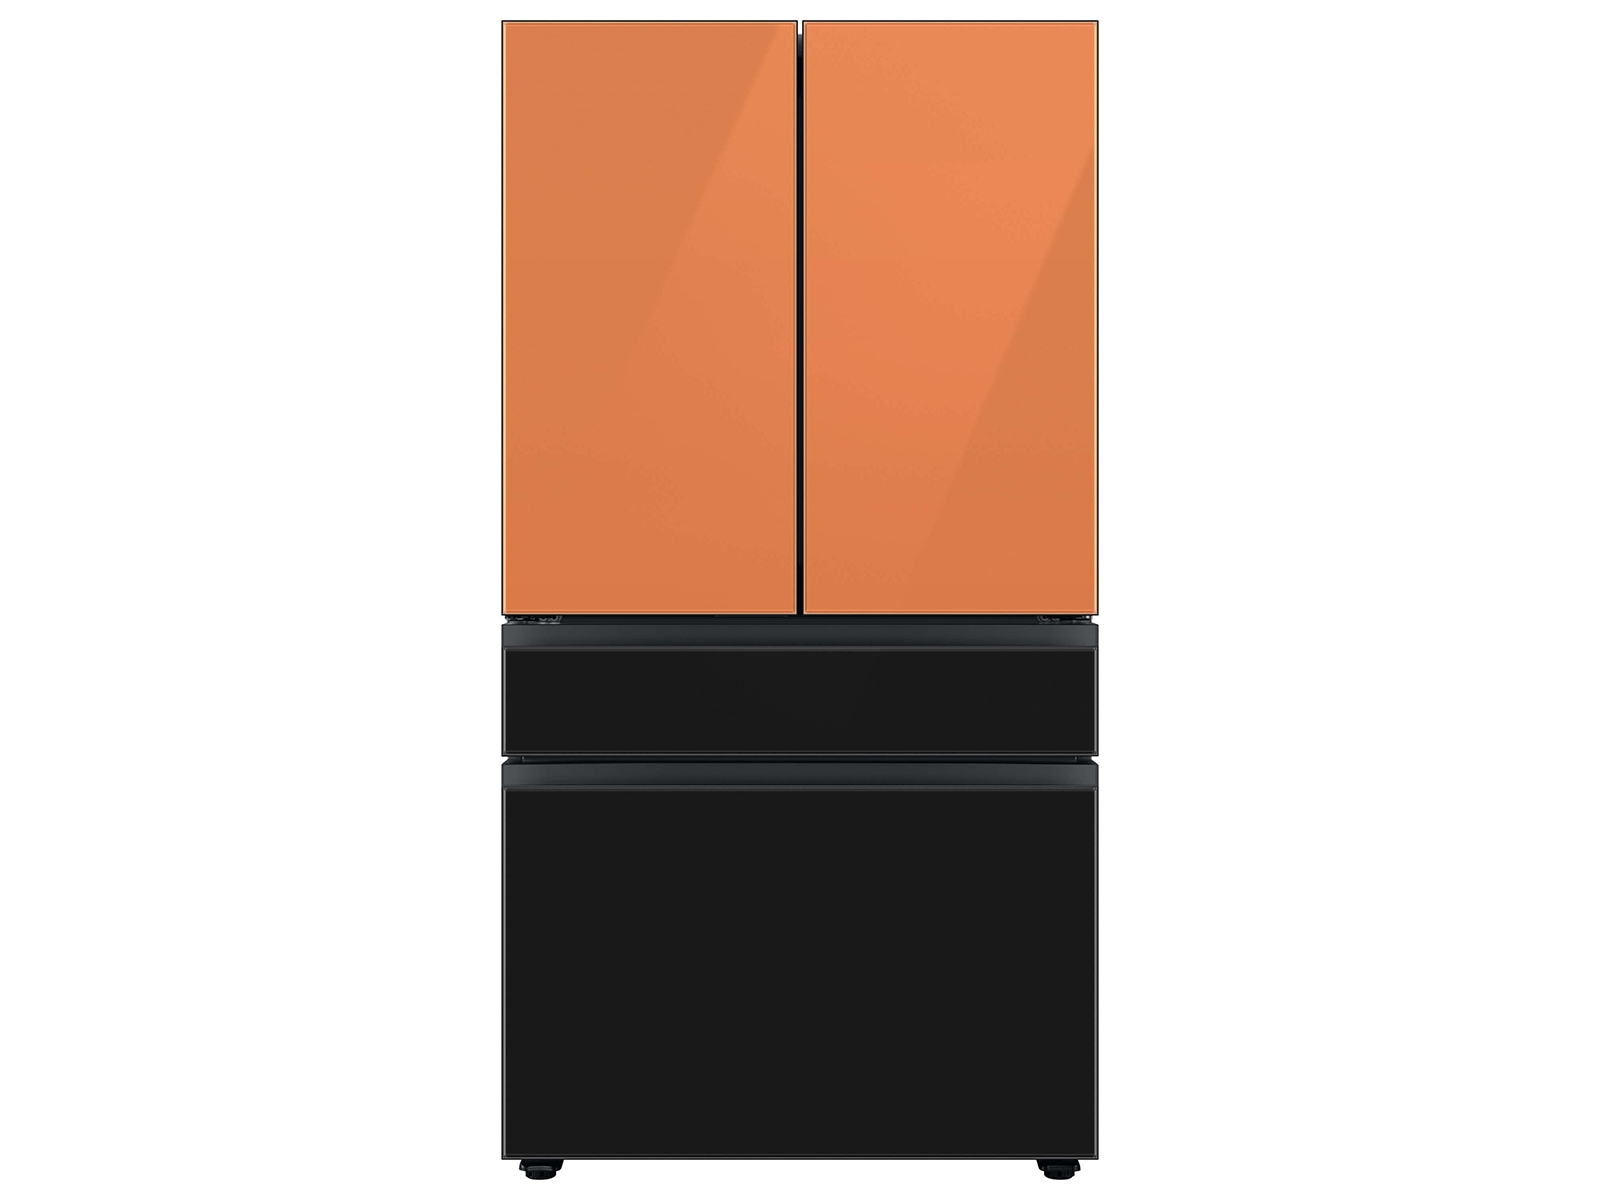 Thumbnail image of Bespoke 4-Door French Door Refrigerator Panel in Charcoal Glass - Middle Panel